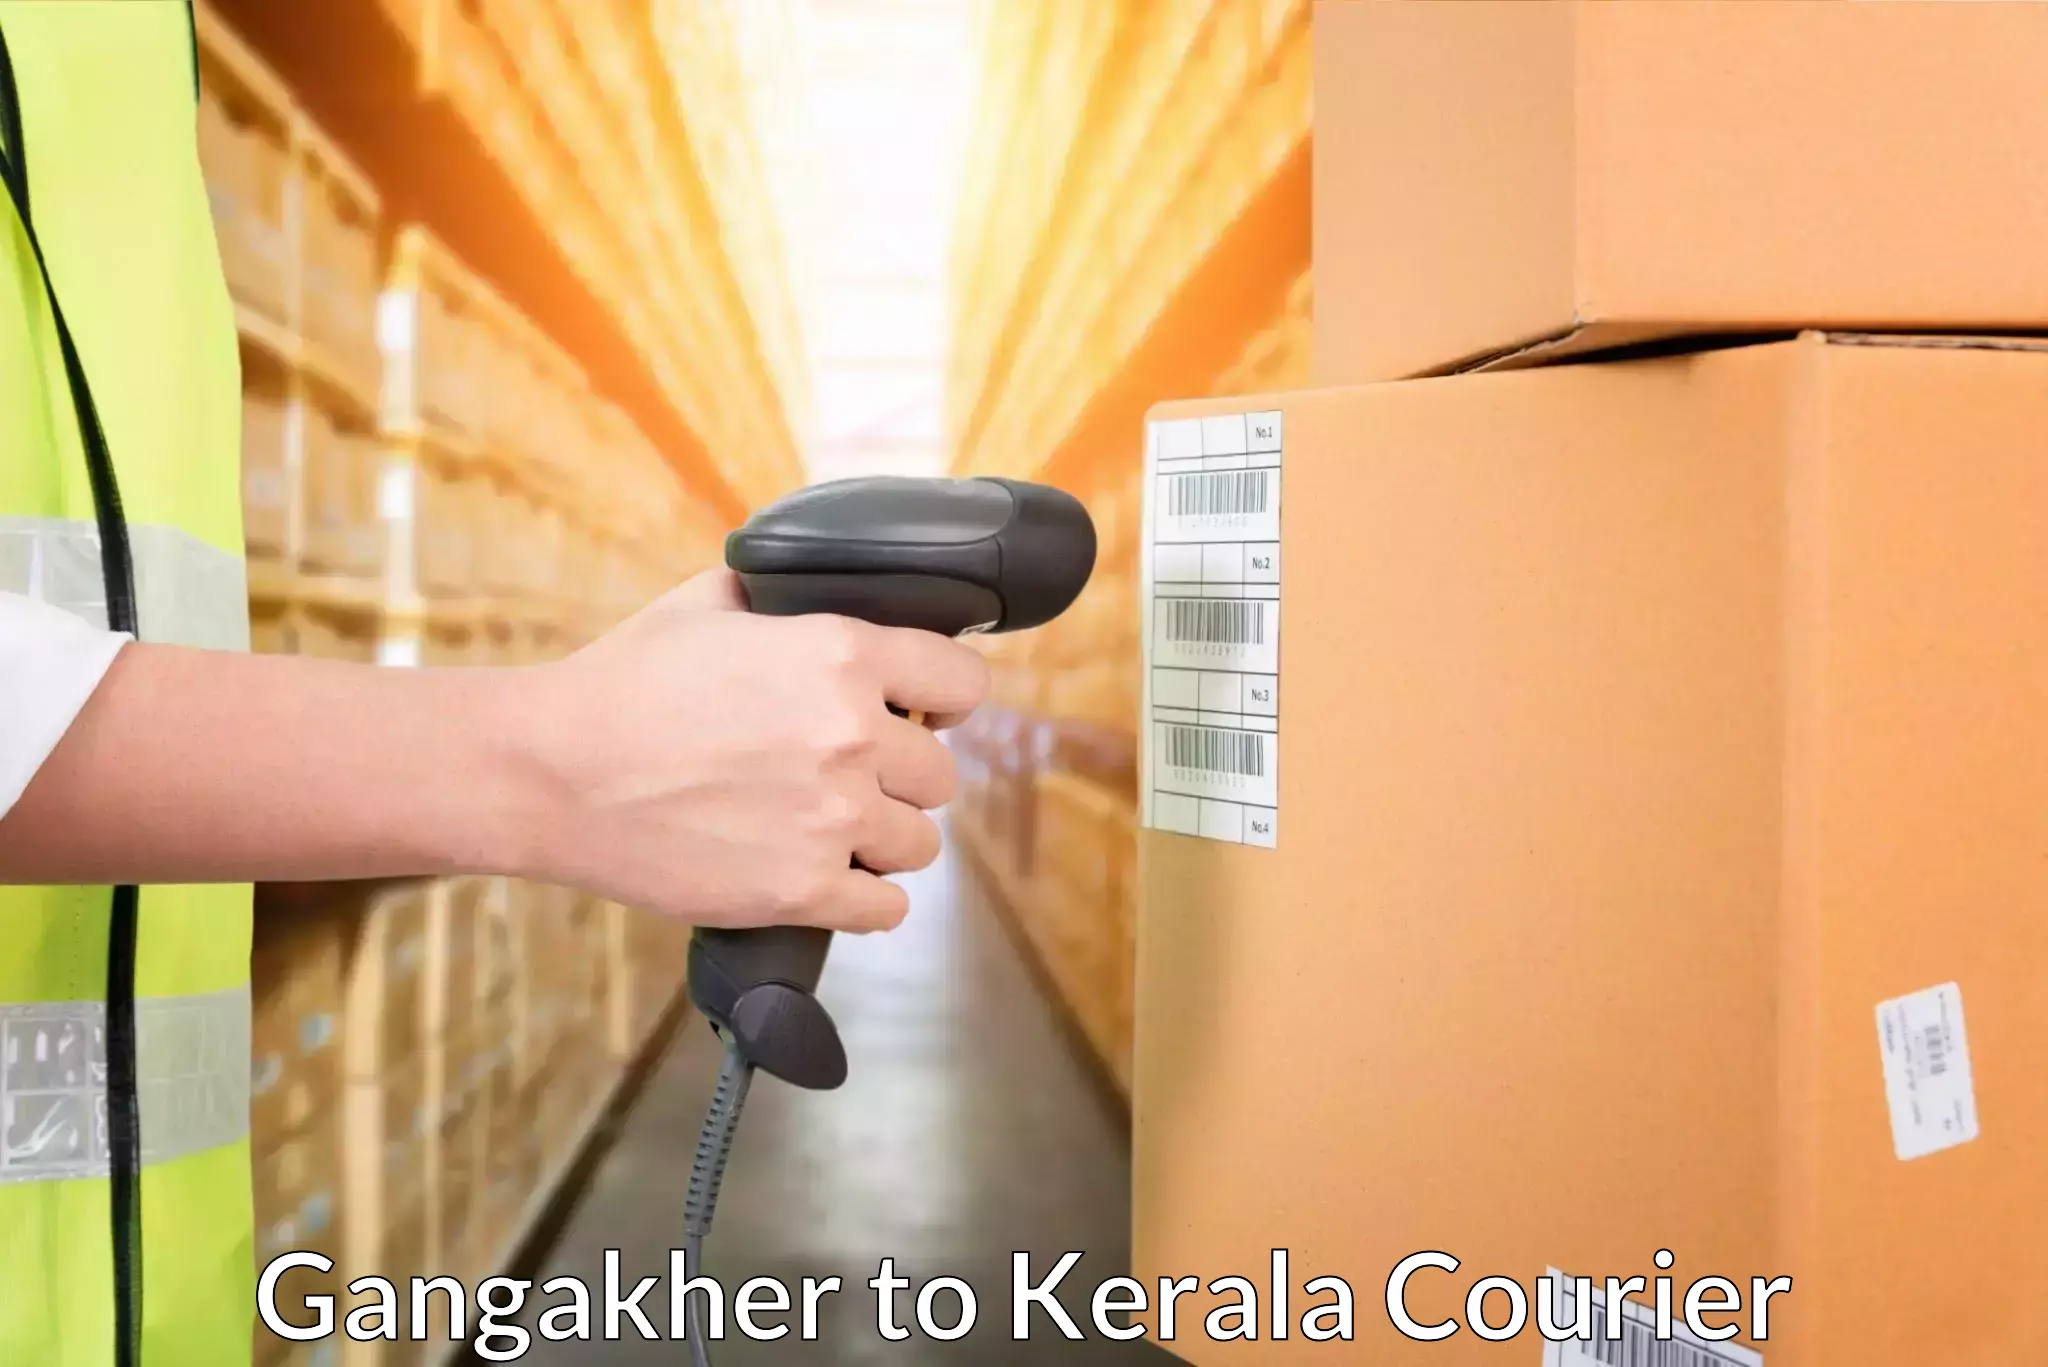 Fast shipping solutions Gangakher to Kerala